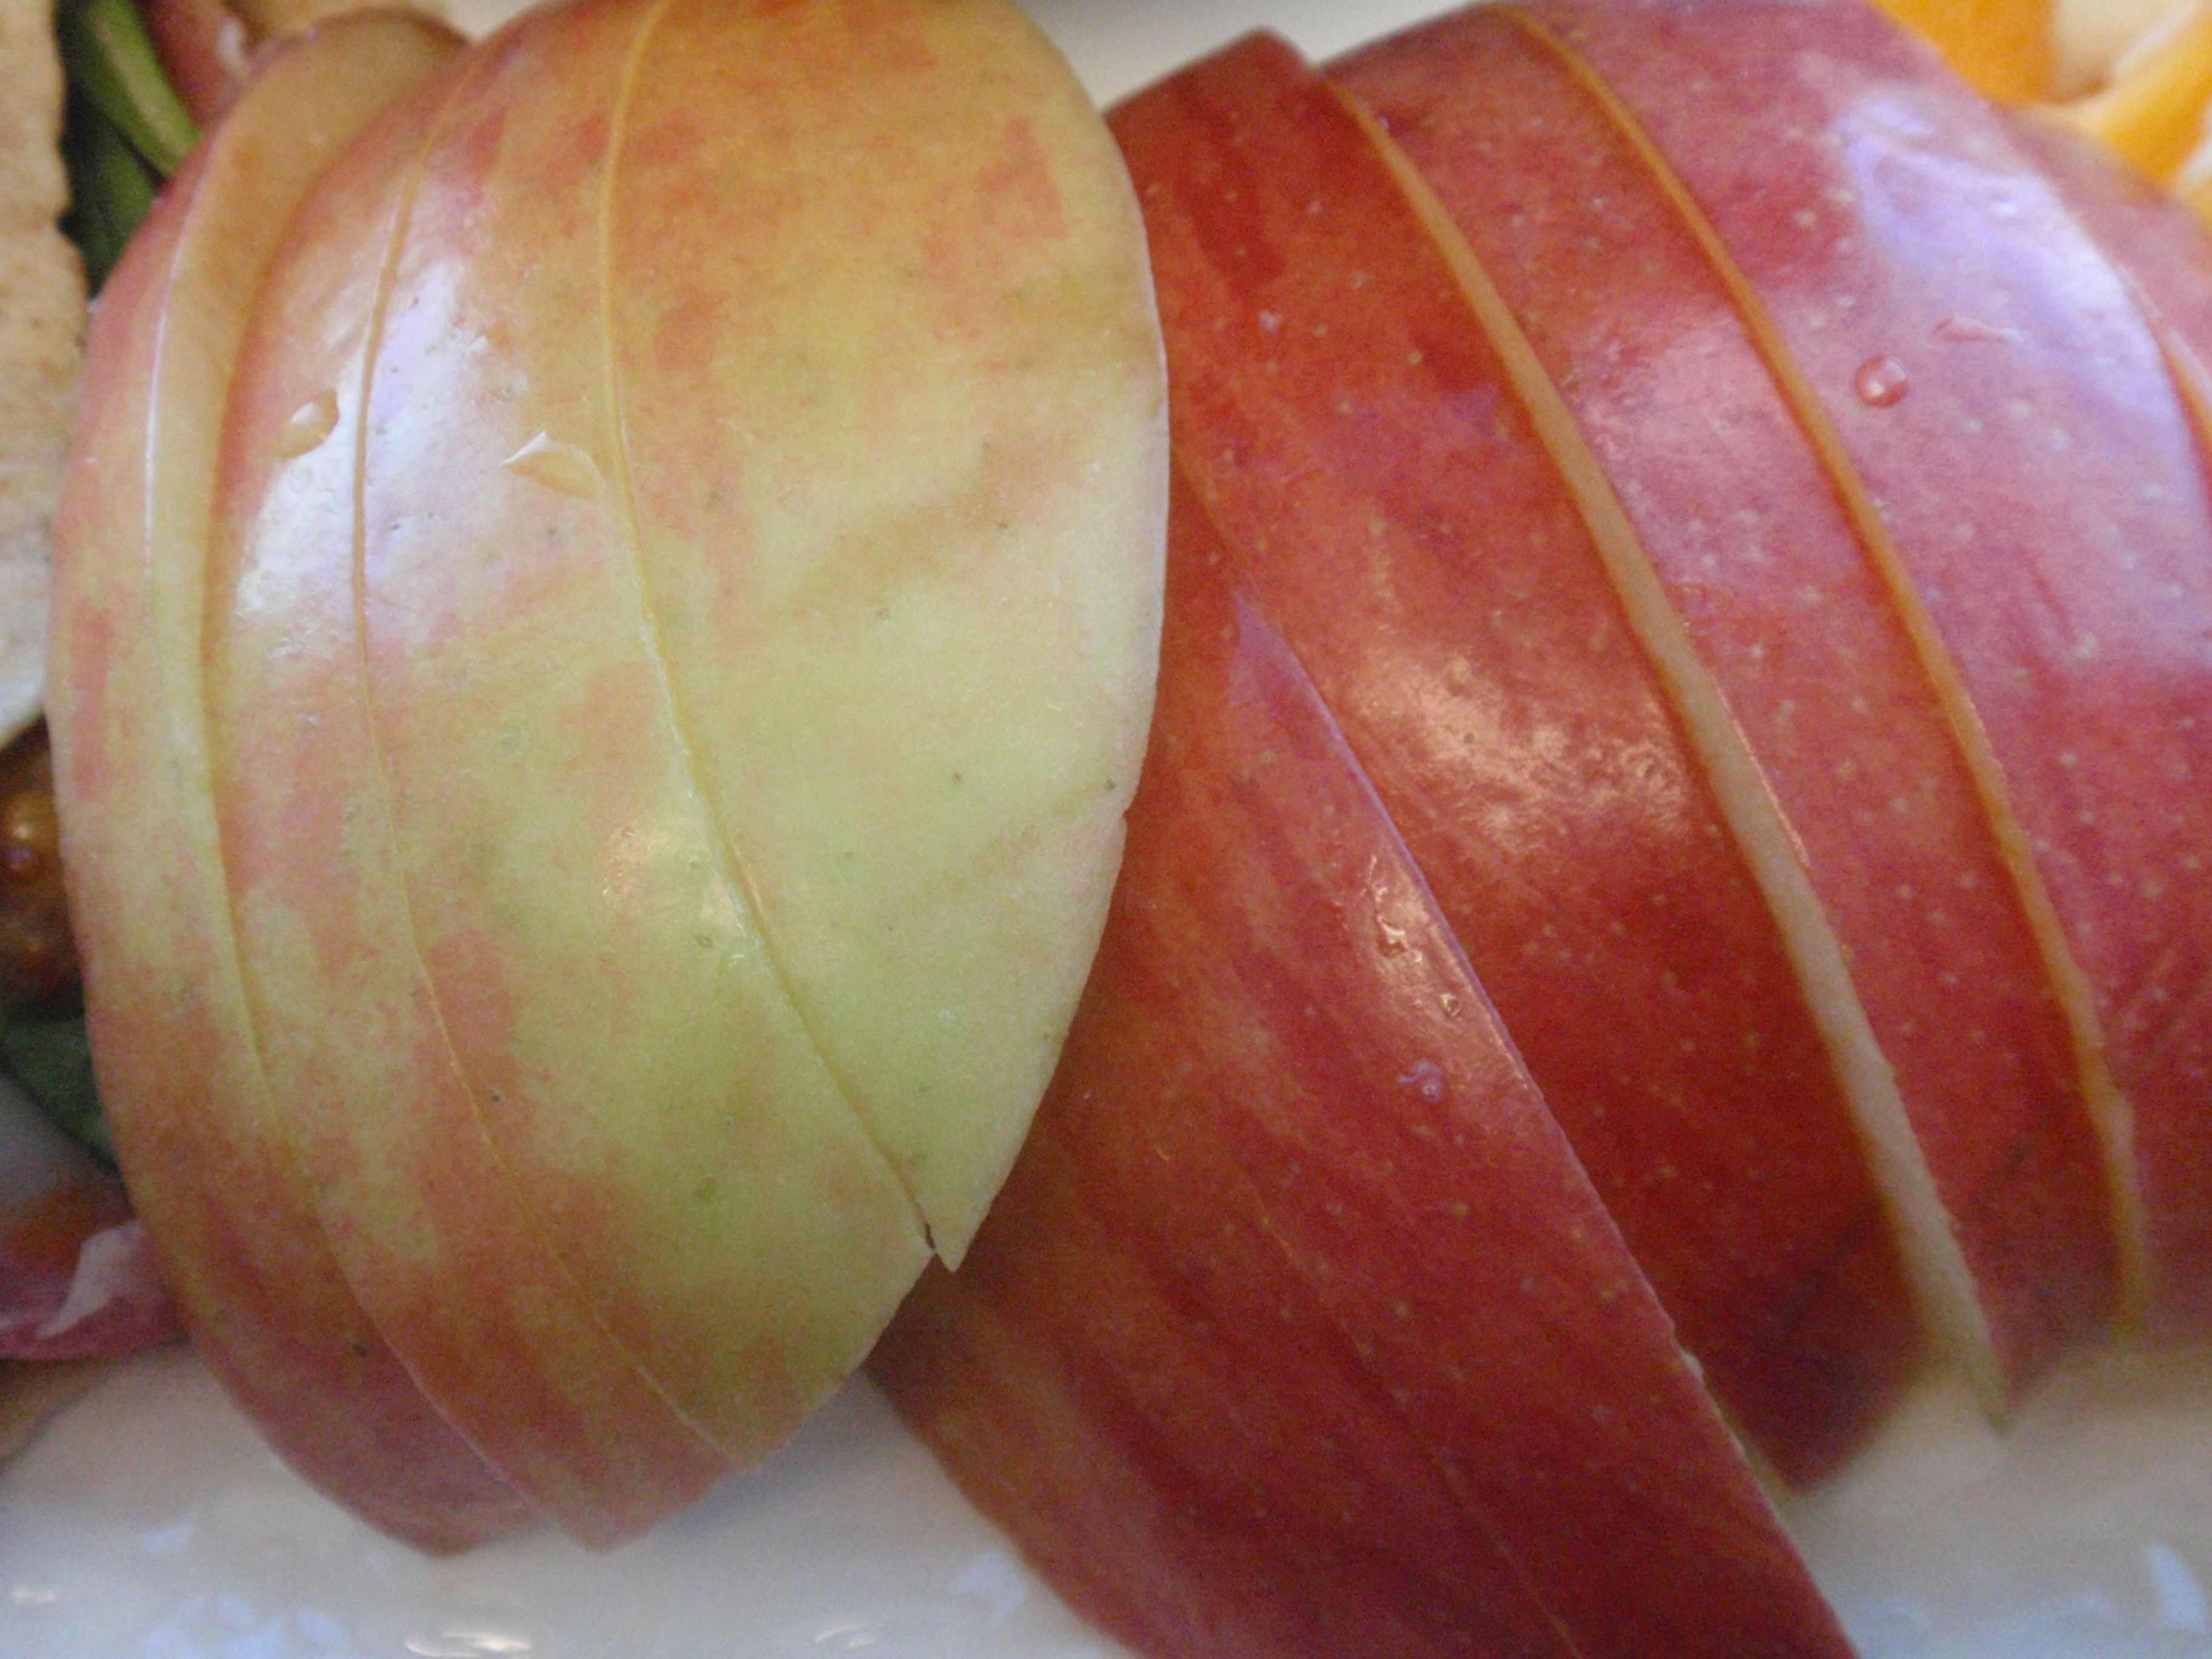 sliced Fuji apple (by the way, Fuji apples make the best apples in apple pie!)